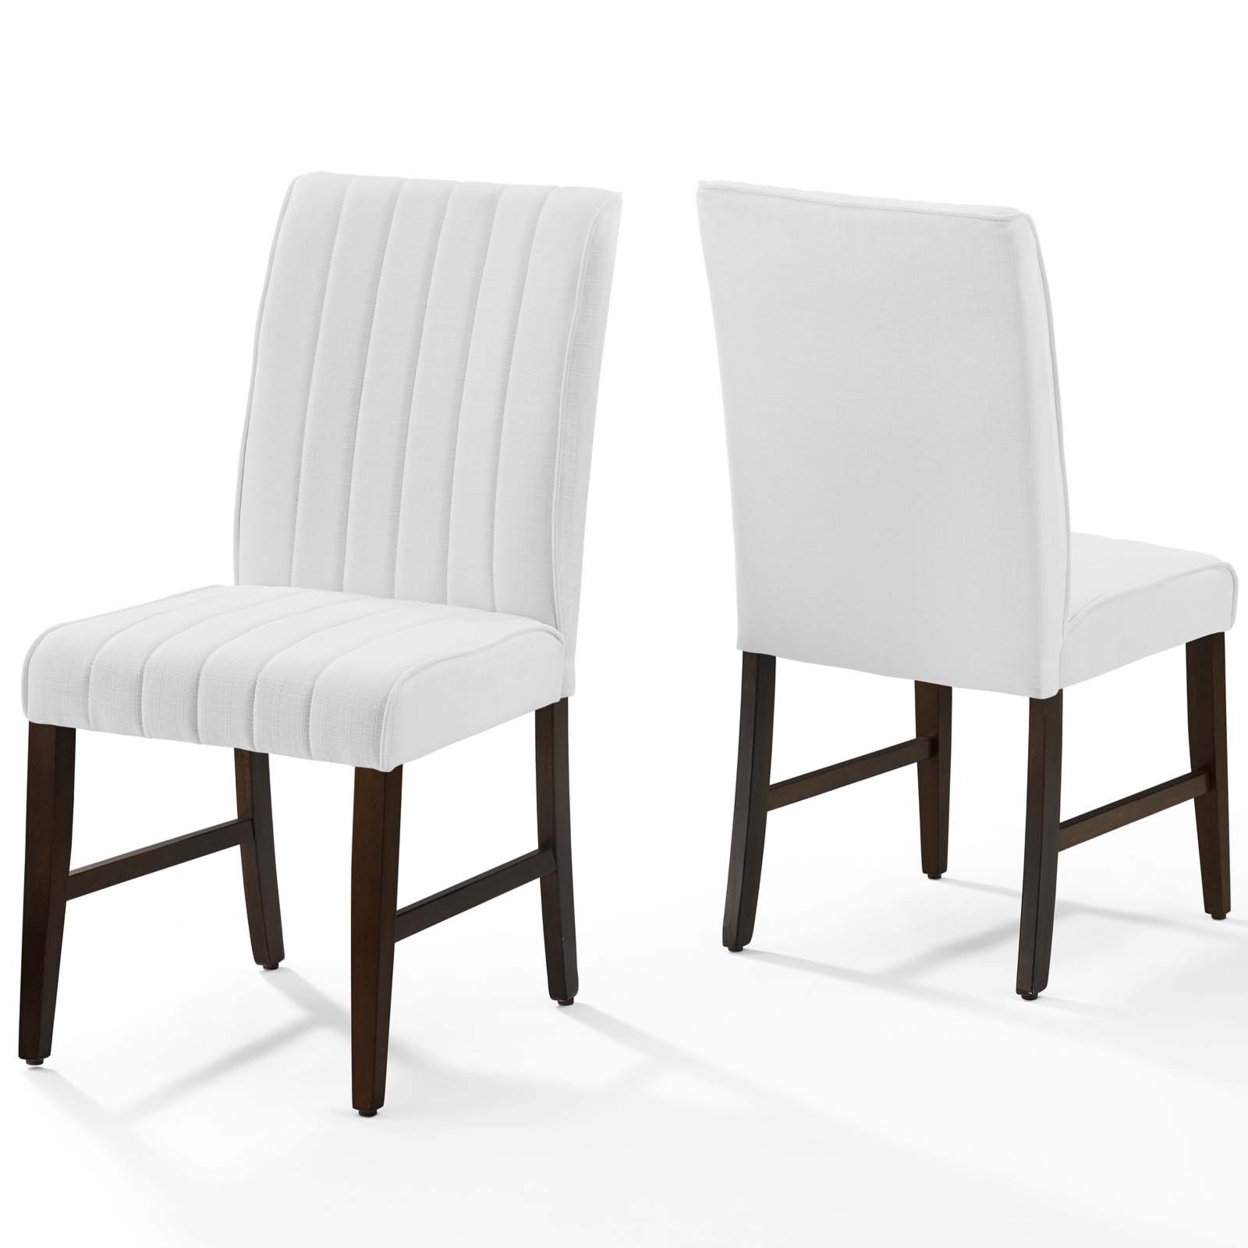 Motivate Channel Tufted Upholstered Fabric Dining Chair Set Of 2,White